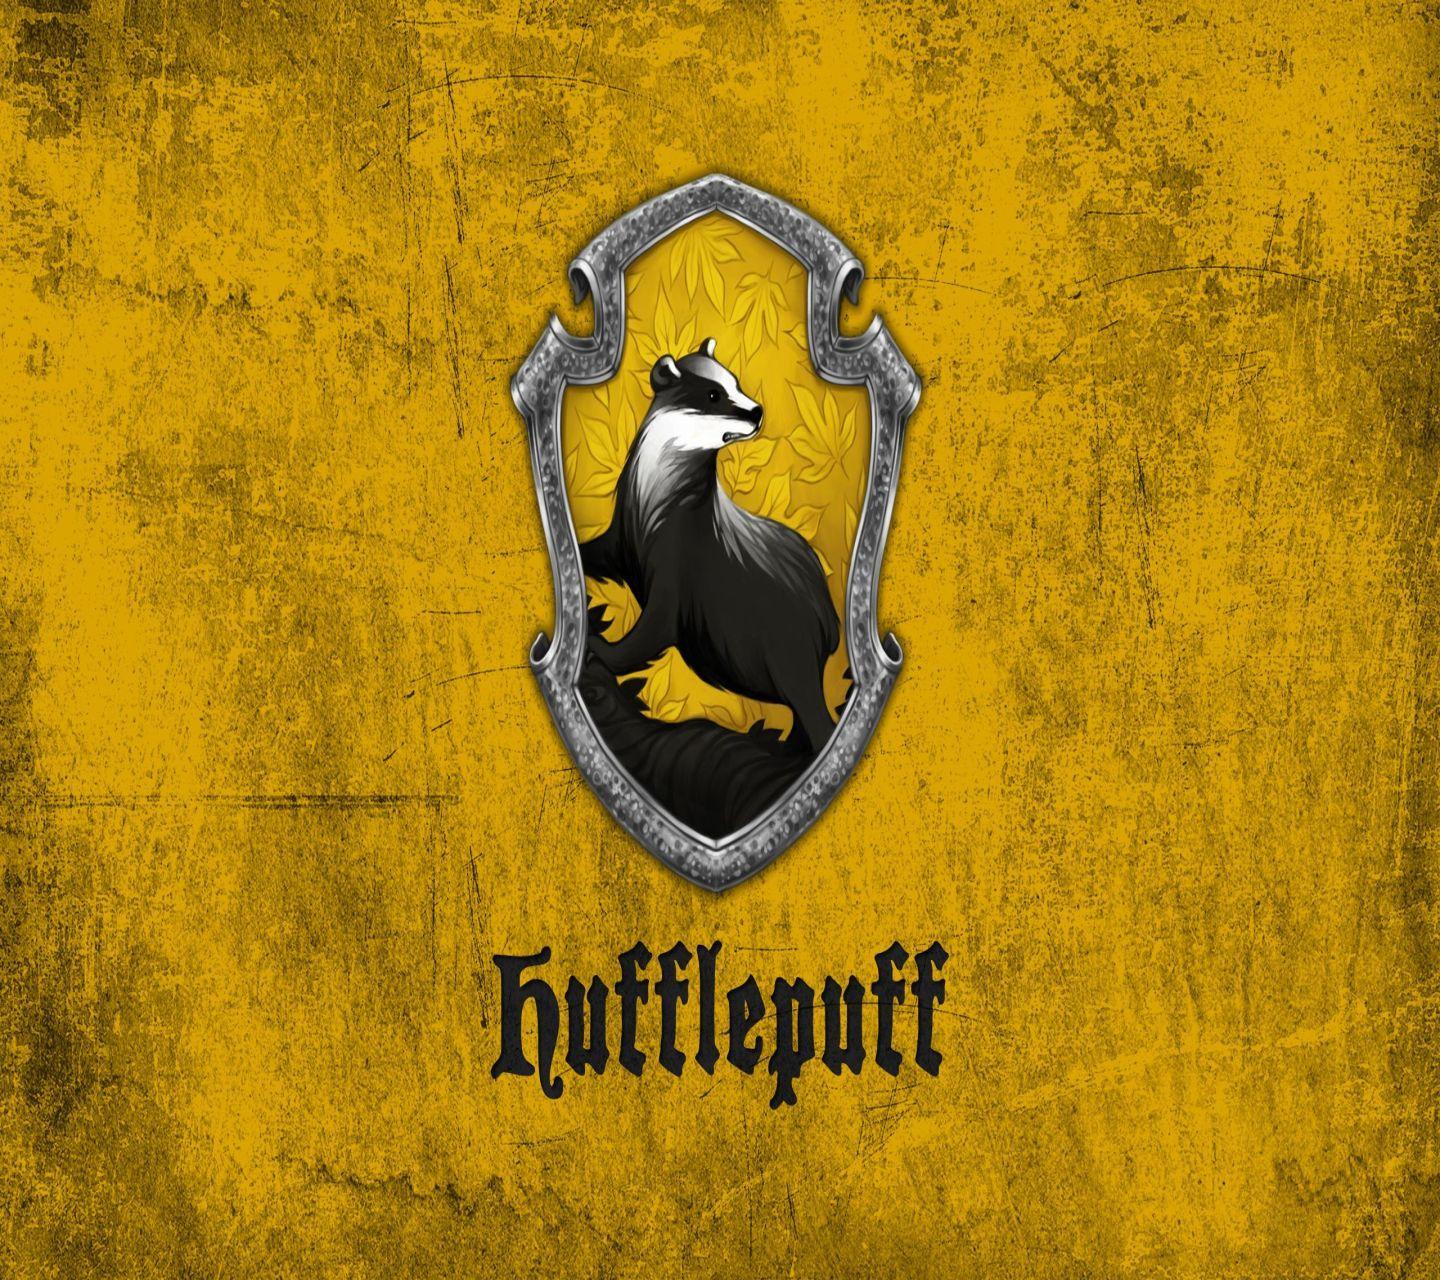 Hufflepuff Quidditch Wallpapers Top Free Hufflepuff Quidditch Backgrounds Wallpaperaccess